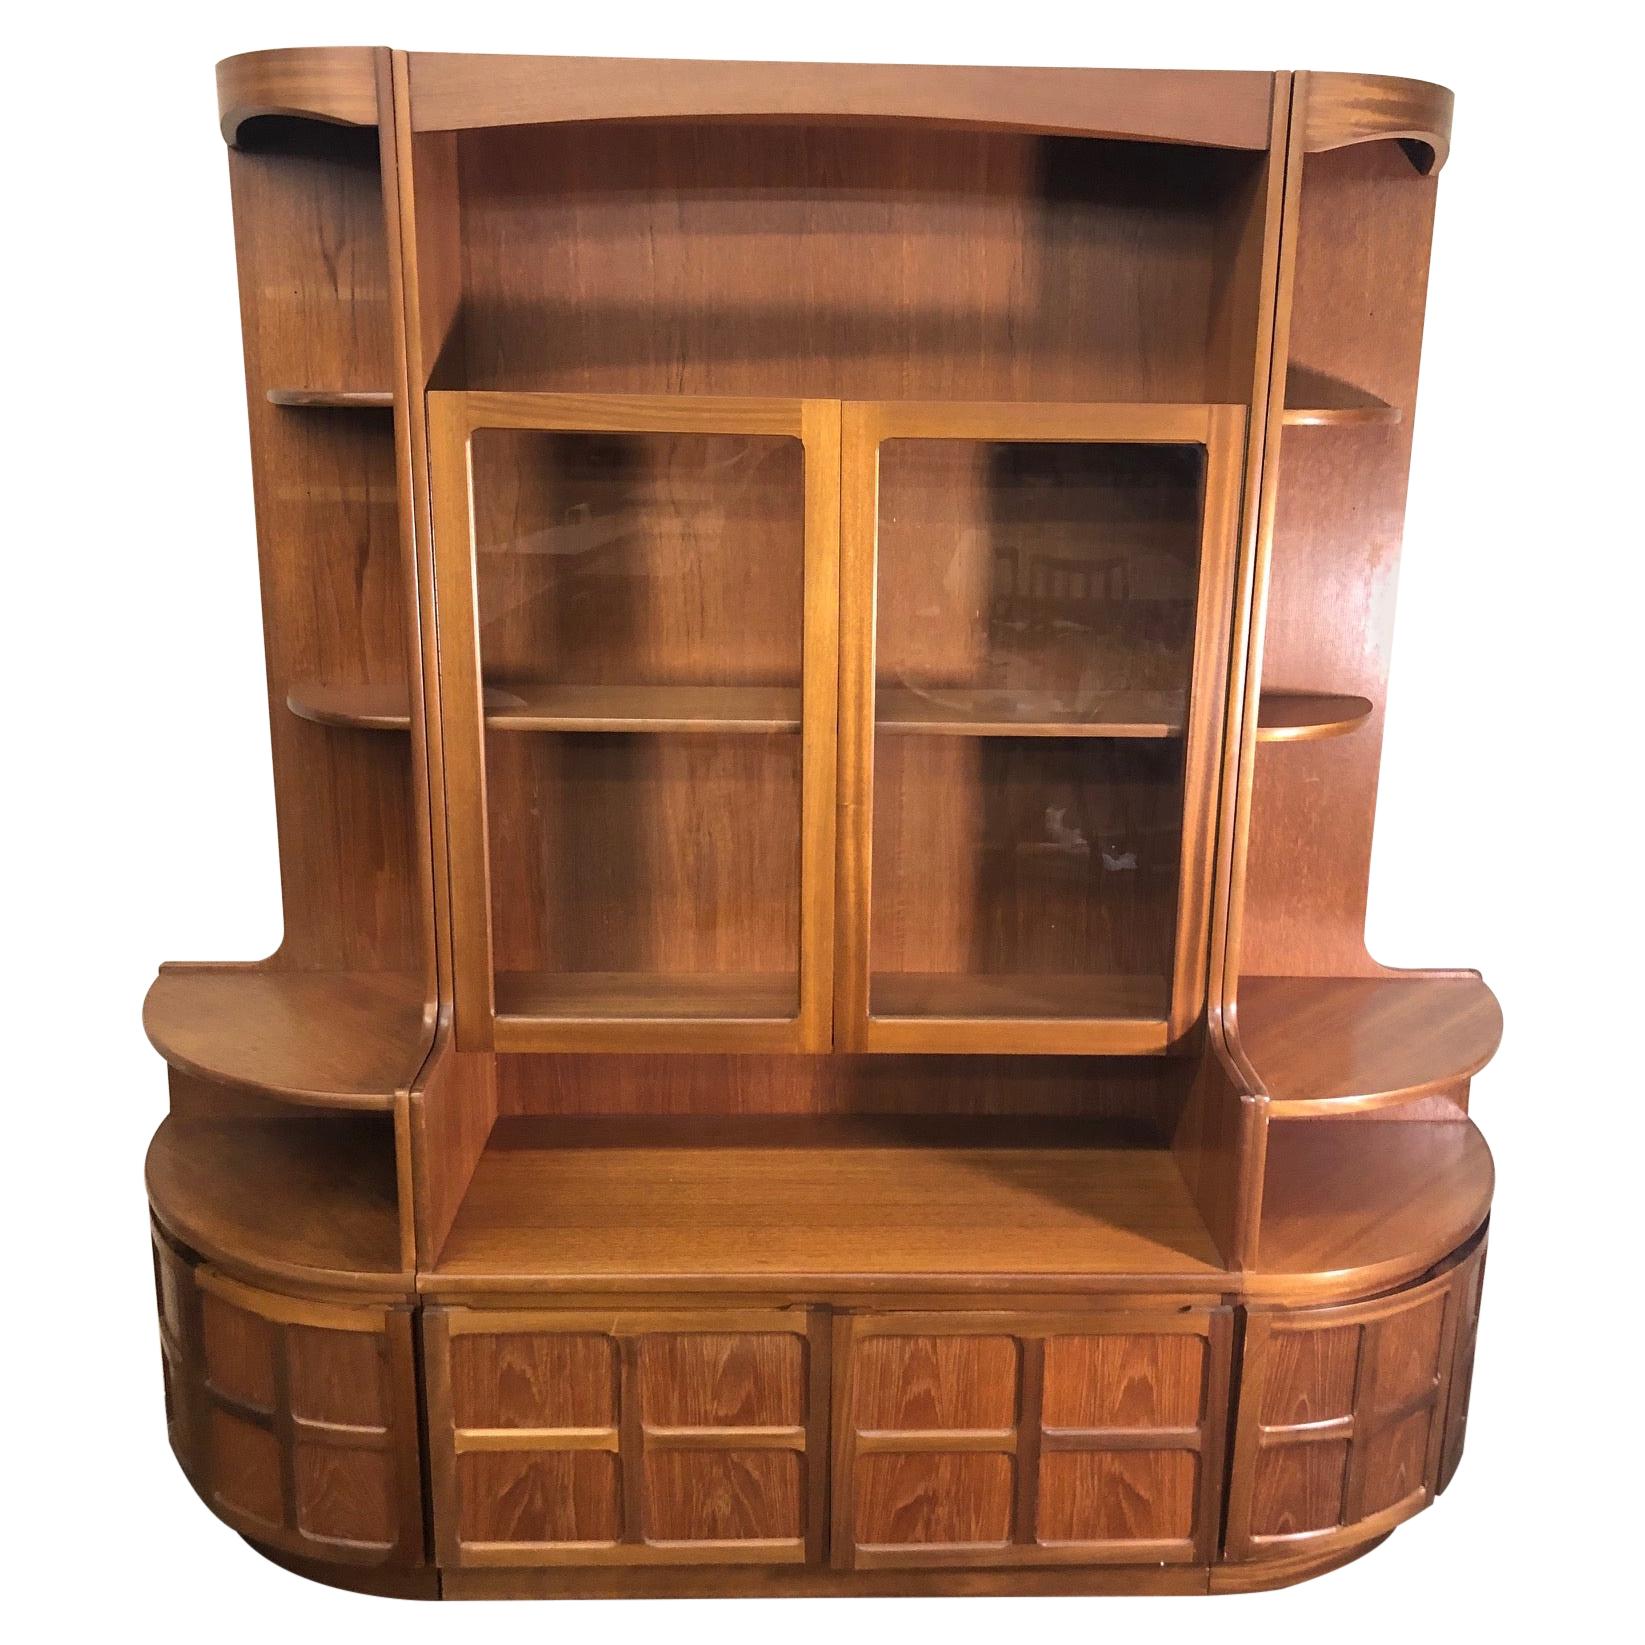 Midcentury Teak Modular 3 Part Wall Unit by Nathan Furniture For Sale